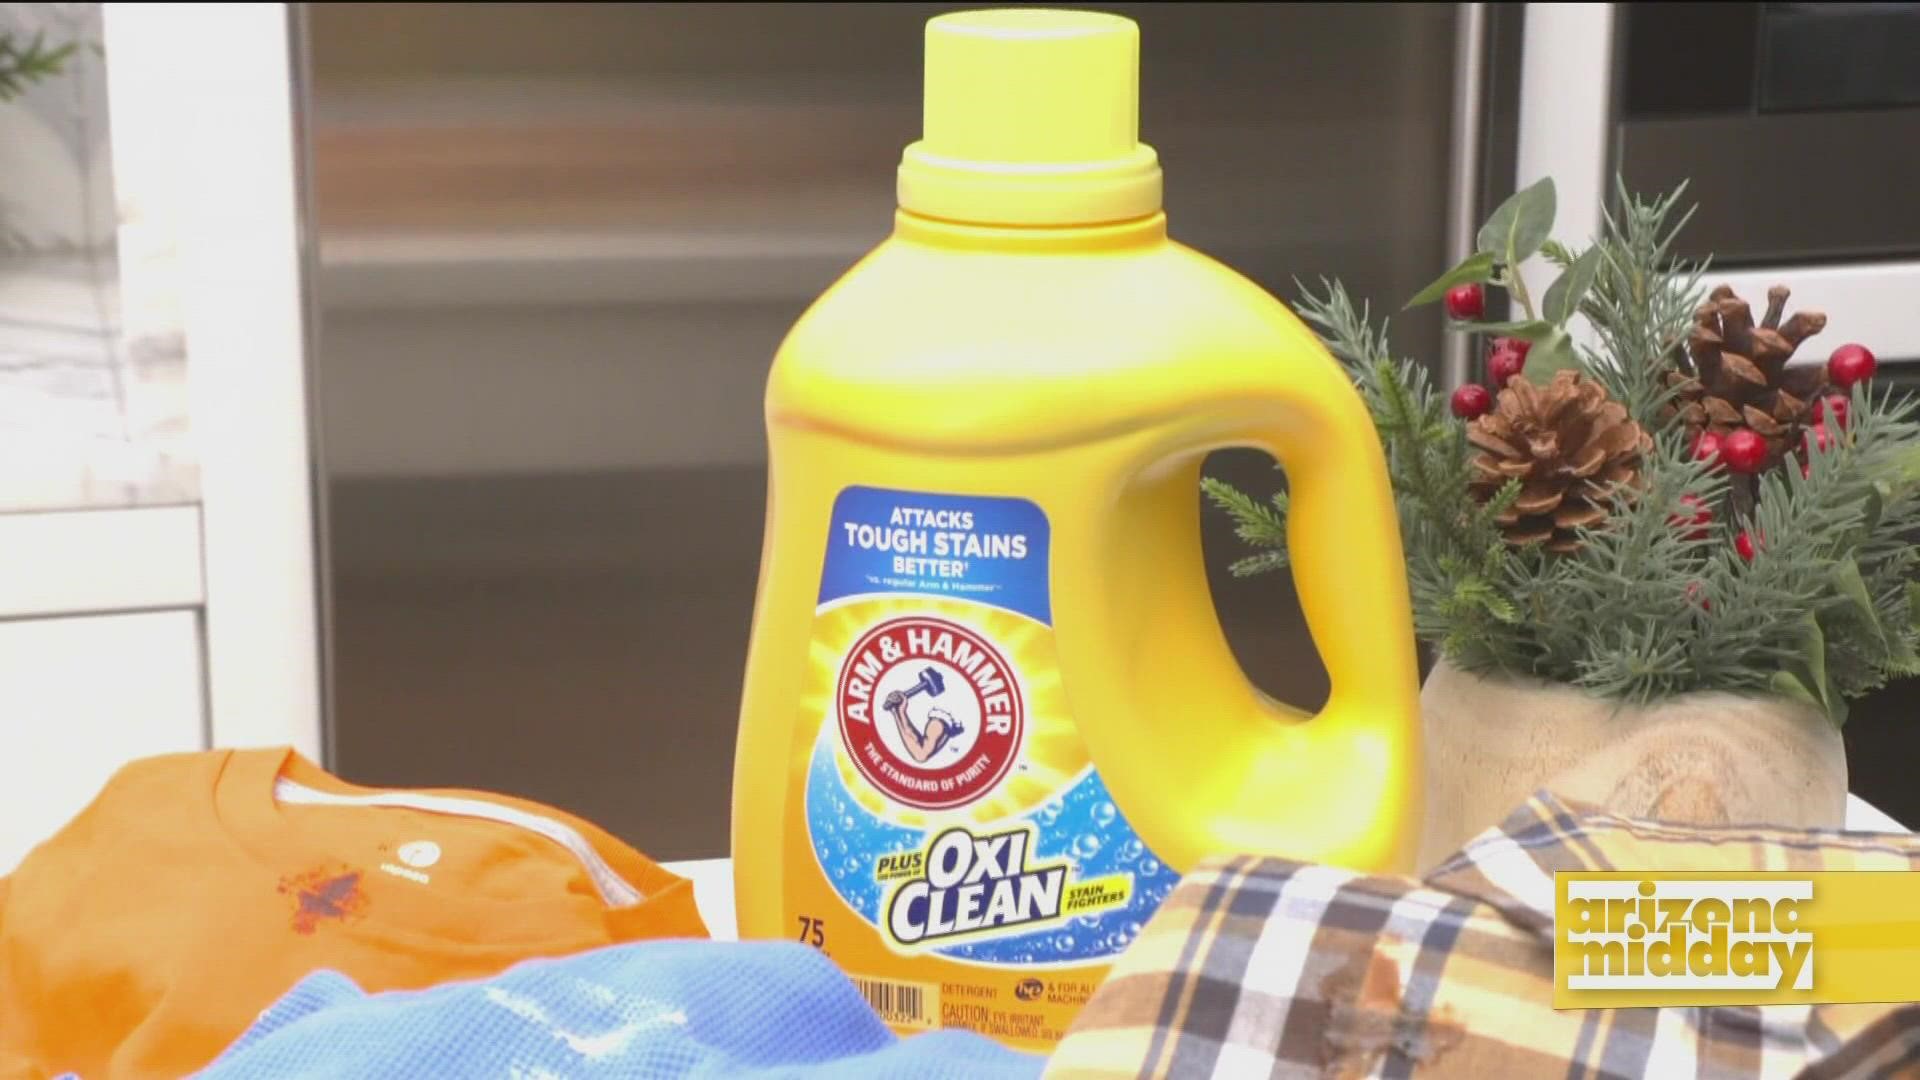 Chef & Actor David Burtka gives us all the tips and tricks to help make the holiday stress free and keeping things clean with Arm & Hammer Laundry.